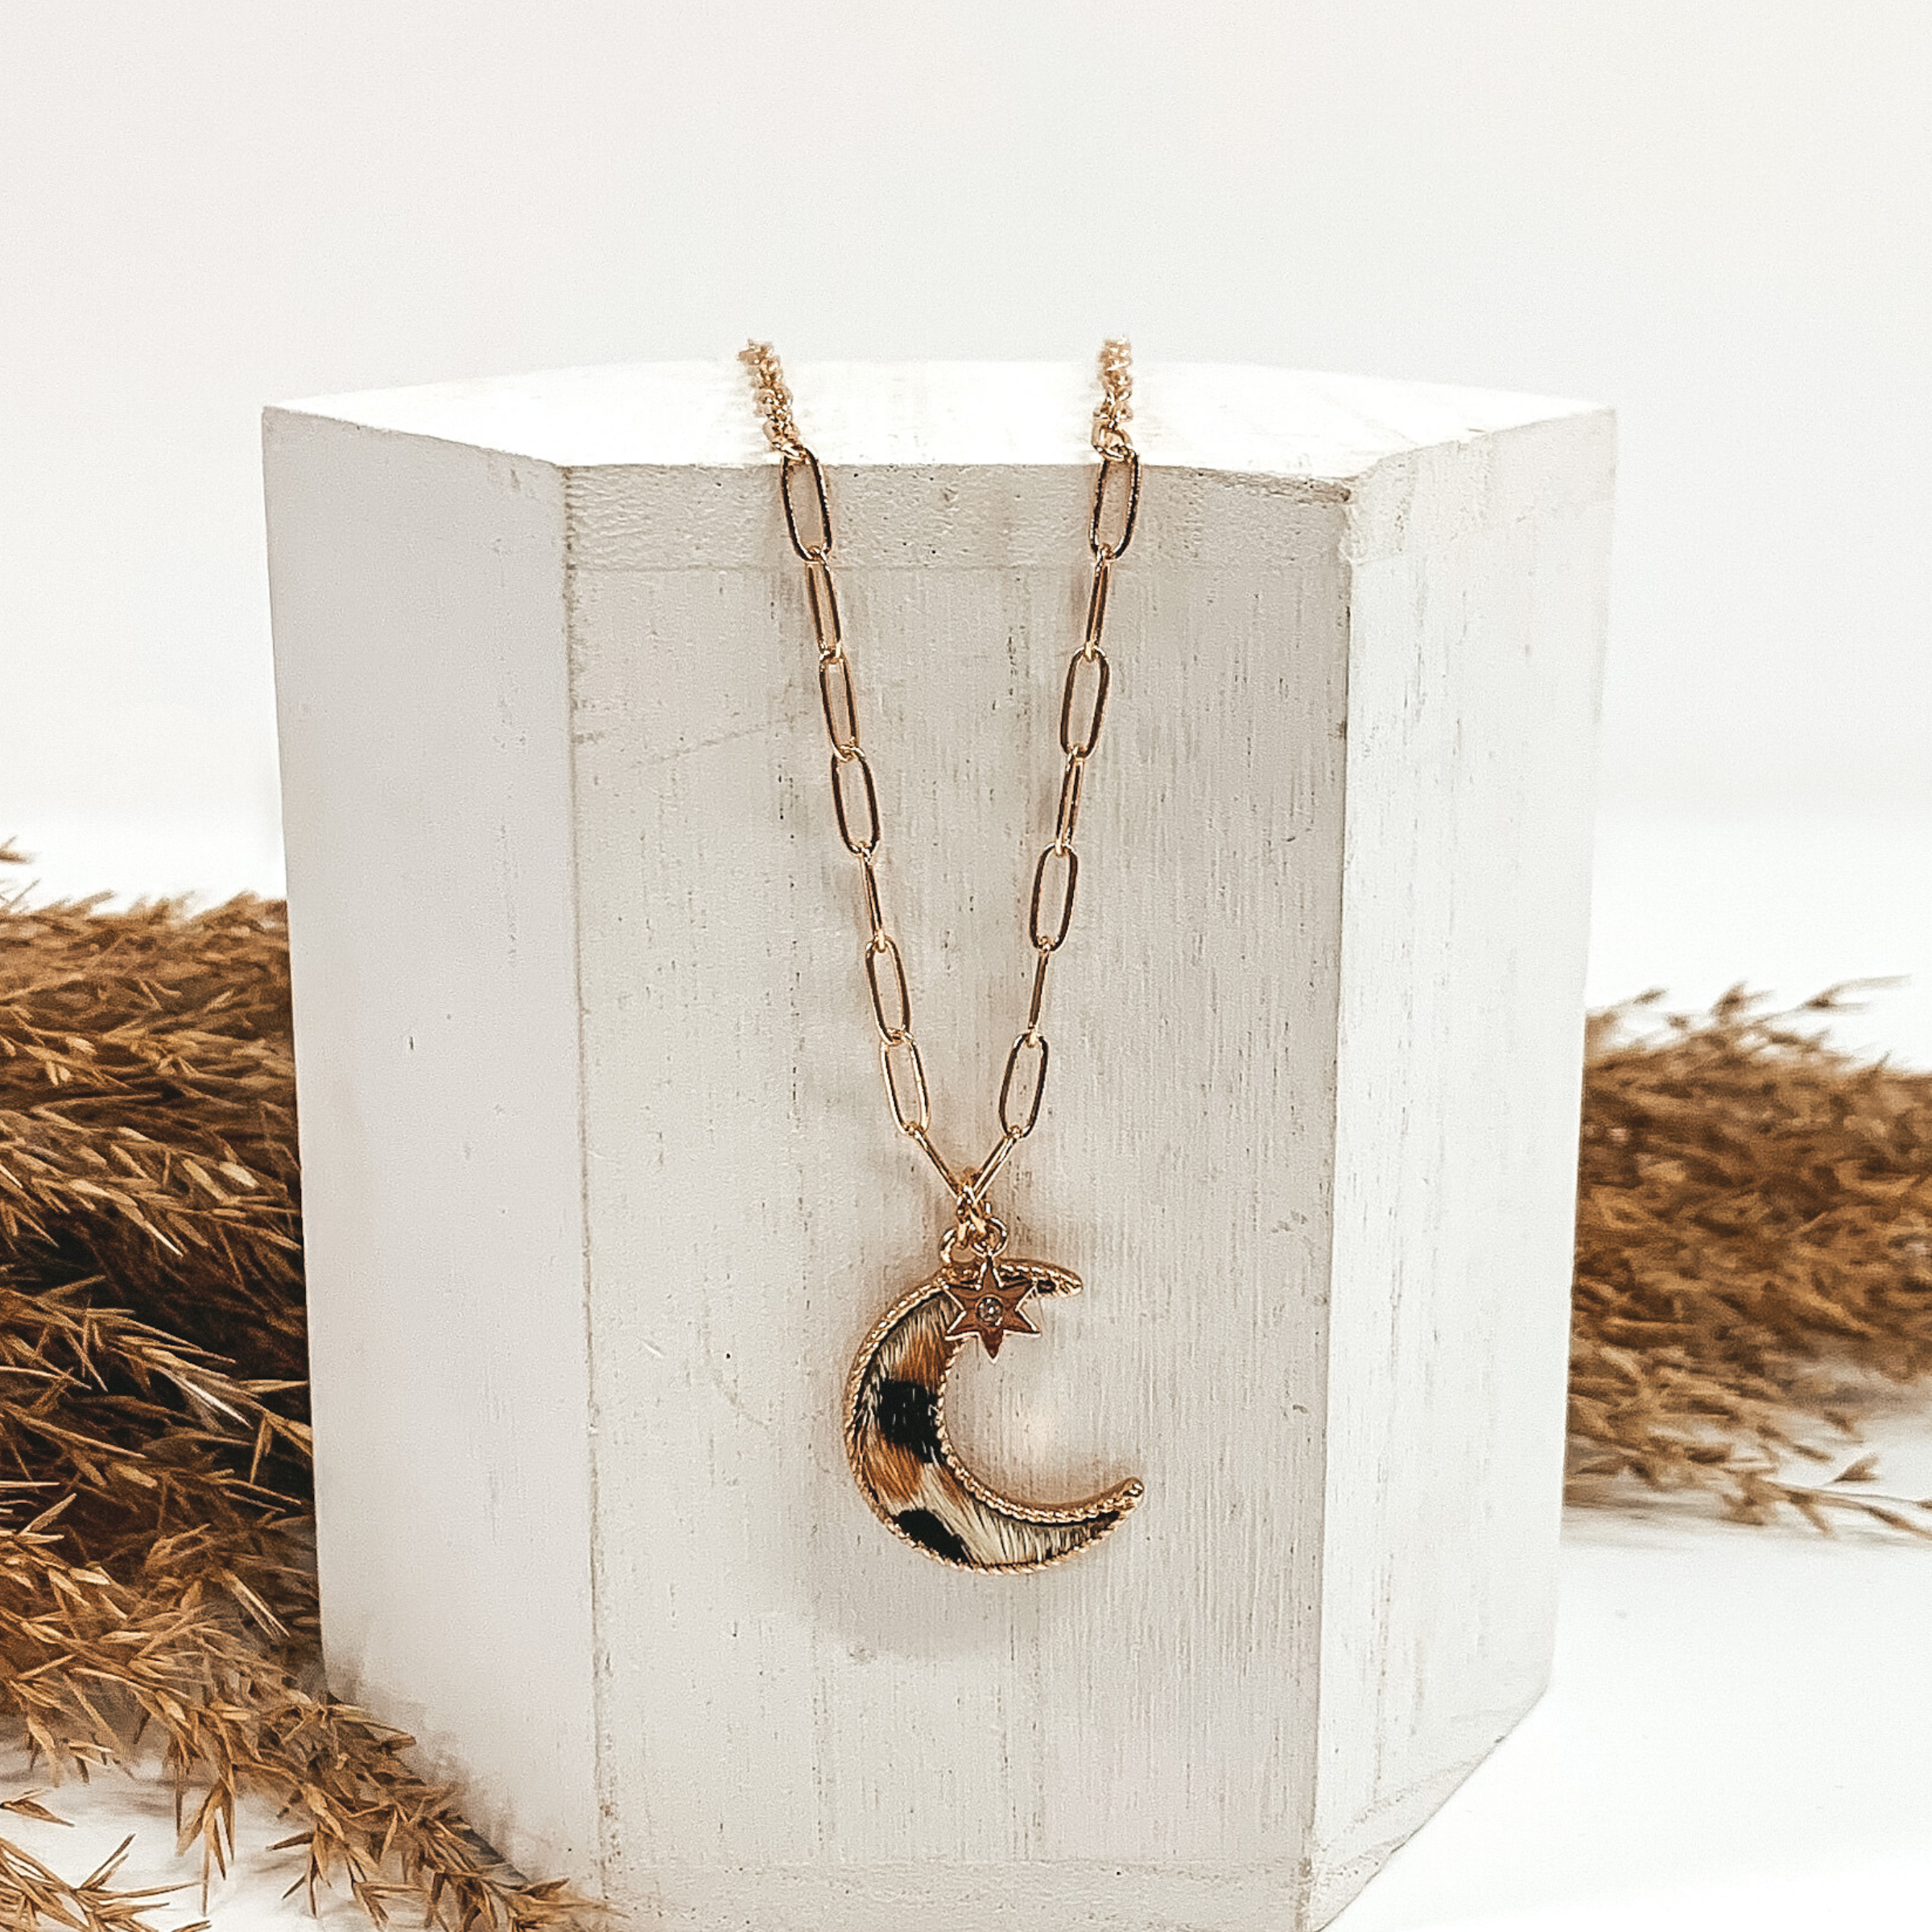 Gold paperclip chain with octagon pendant. The pendant has a white hide animal print inlay. This necklace is pictured laying on a white block with tan floral behind it. This is all pictured on a white background.